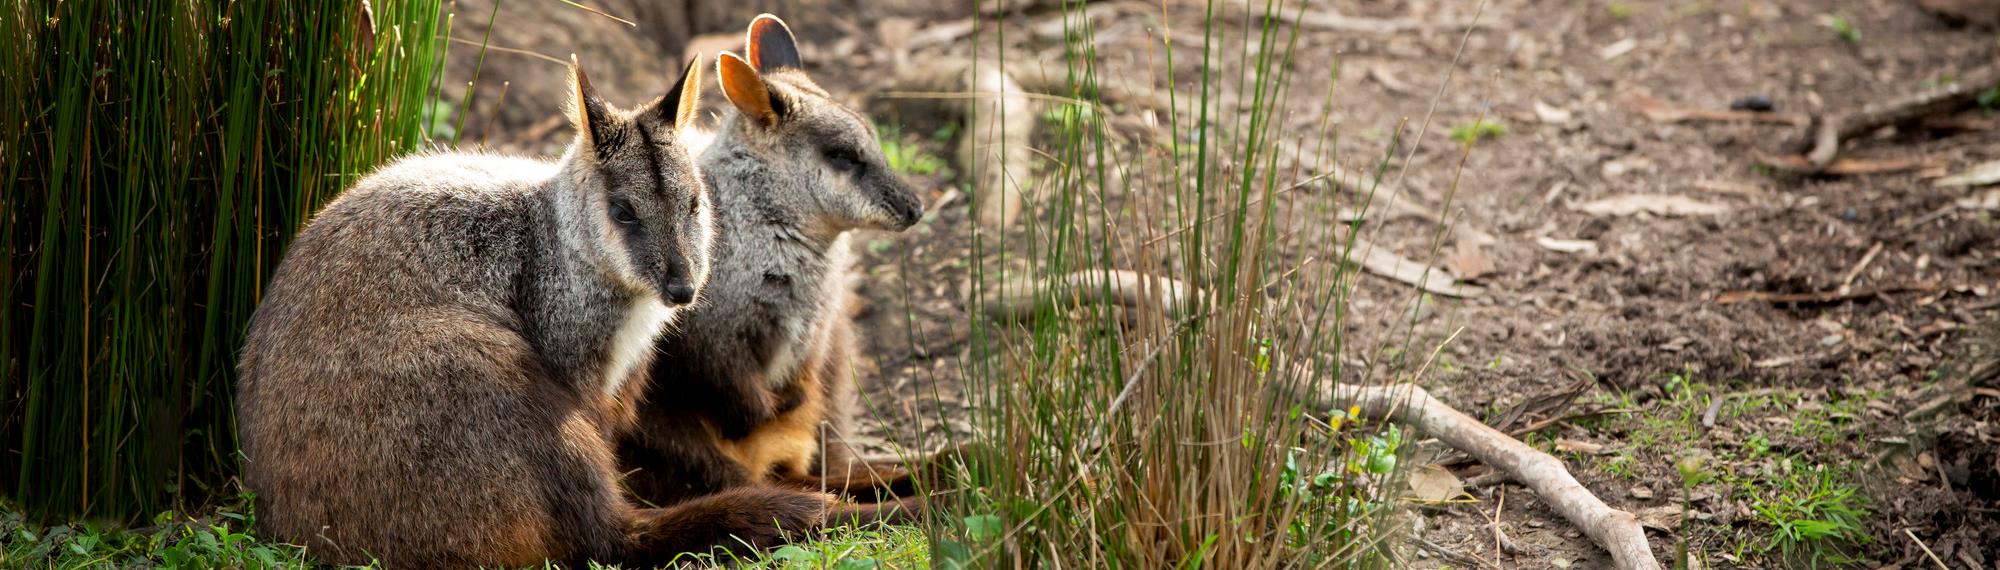 Two Brush-Tailed Rock Wallabies sitting together. They are leaning against a shrub. 